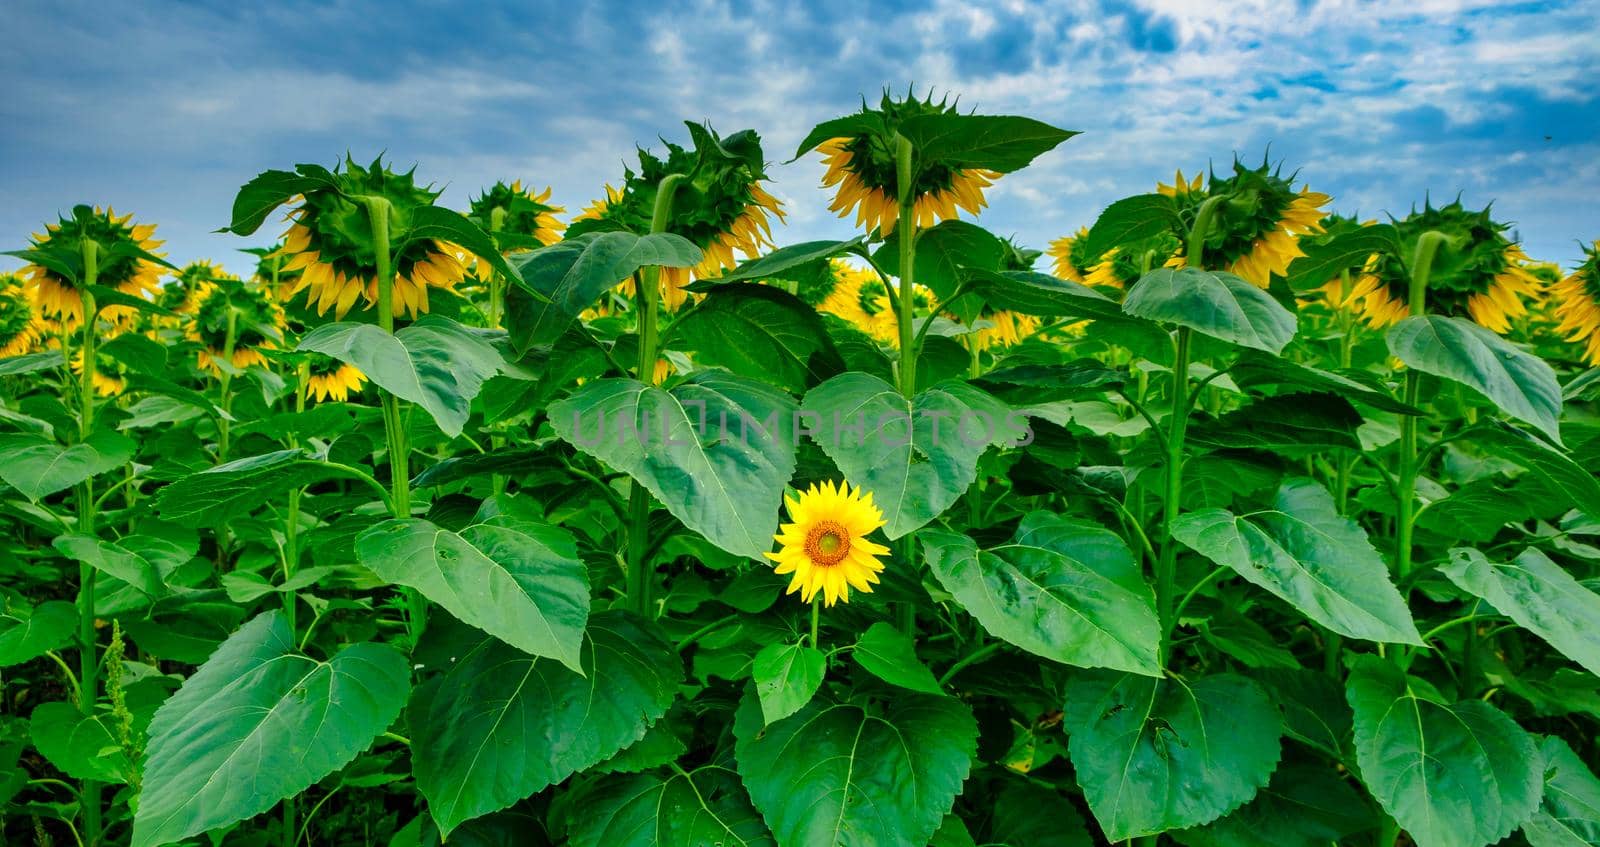 Individuality symbol and independent thinker concept and new leadership concept or individuality as a group of sunflowers on a field with one individual sunflower in the opposite direction by igor010